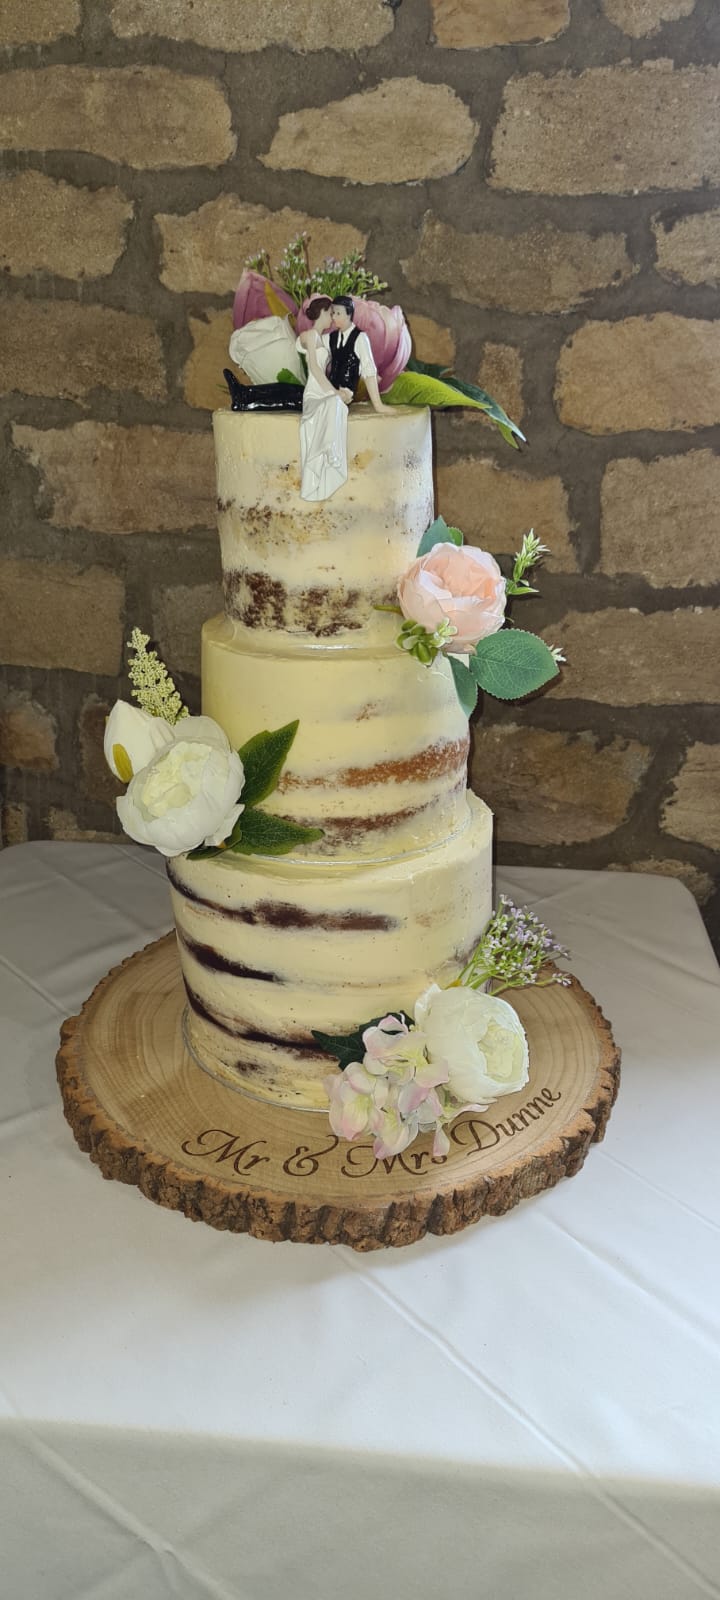 A beautiful wedding cake created for a relative of mine, a three tier cake topped with the bride and the groom.